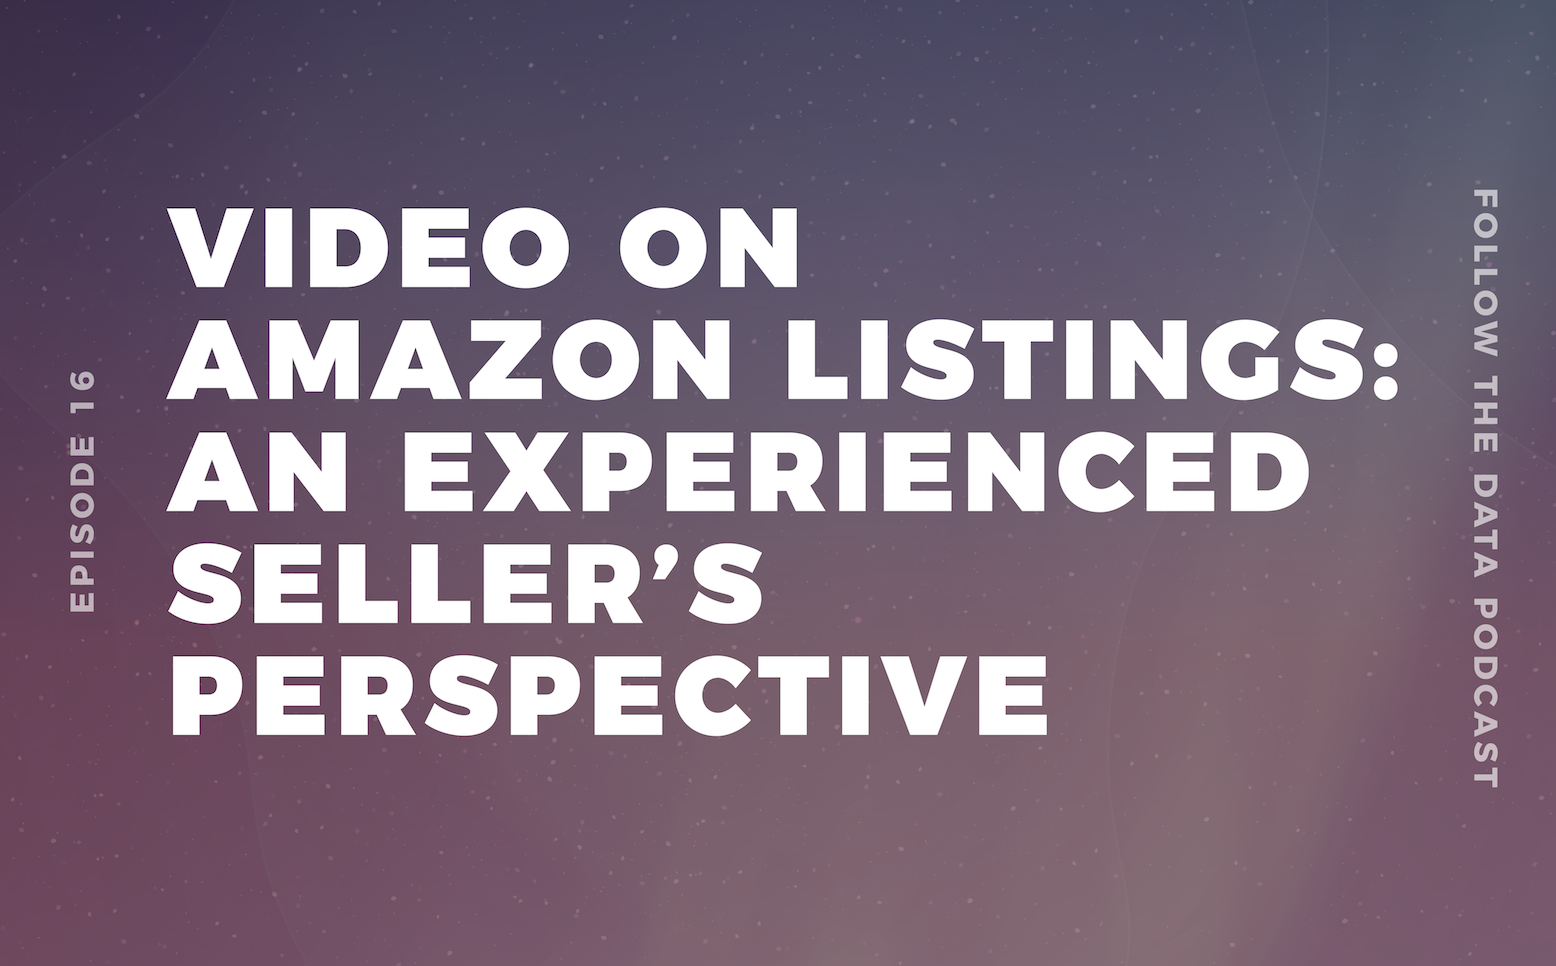 Video on Amazon Listings: An Experienced Seller's Perspective